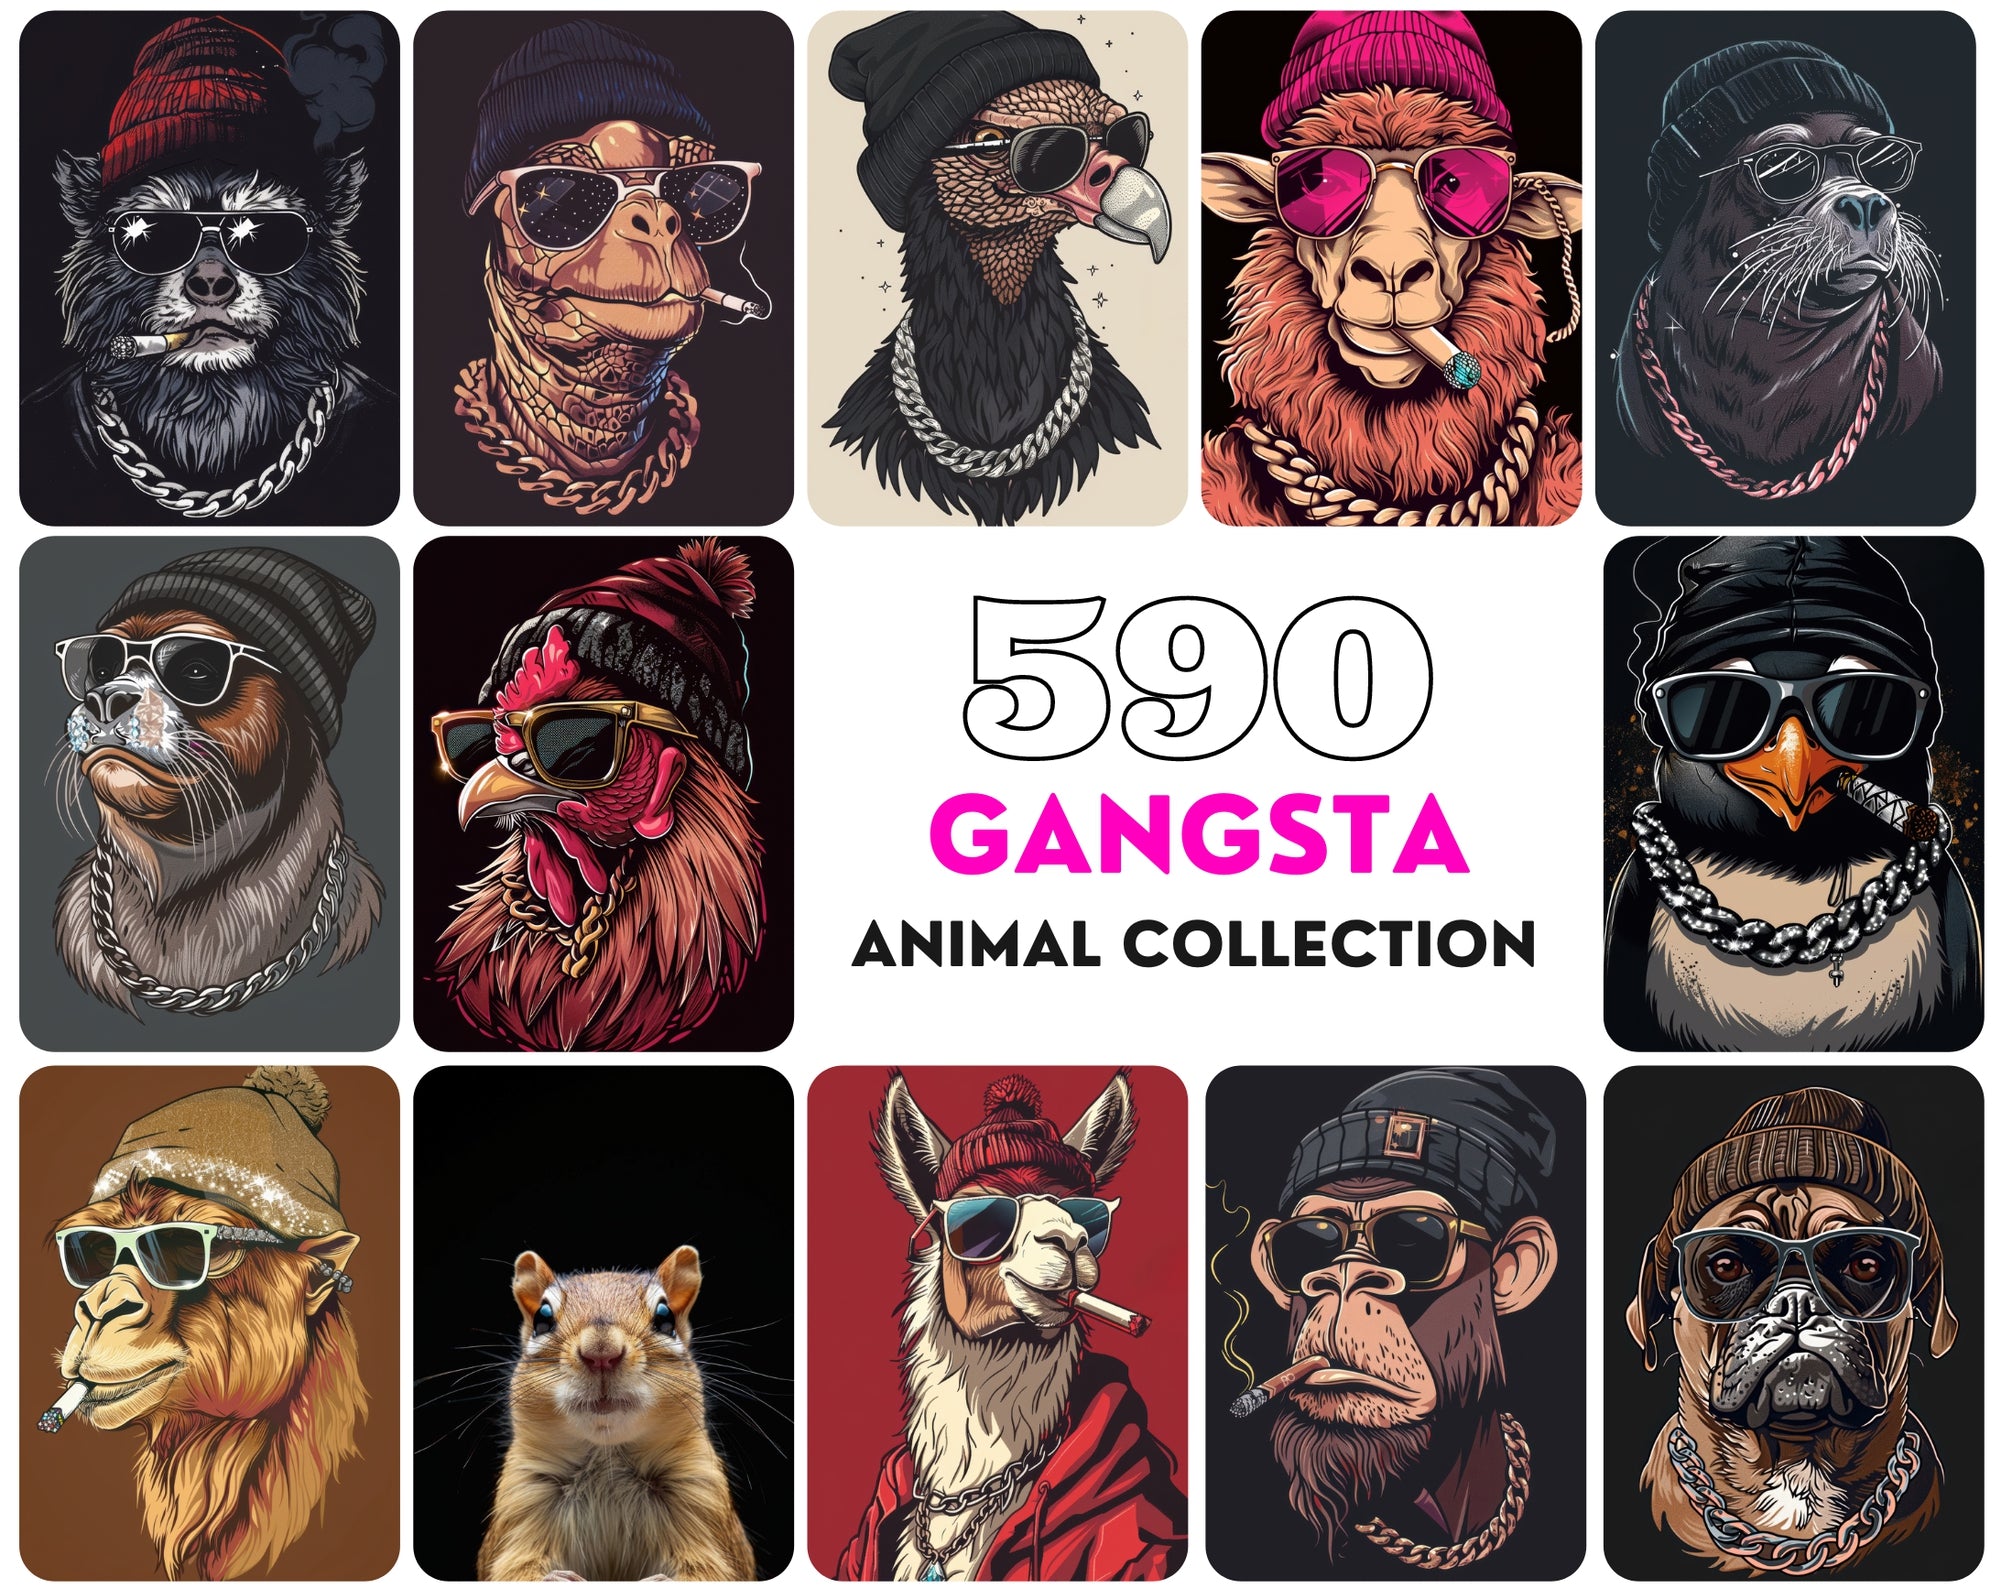 Gangsta Animal Images Pack - 590 High-Resolution JPGs with Commercial License